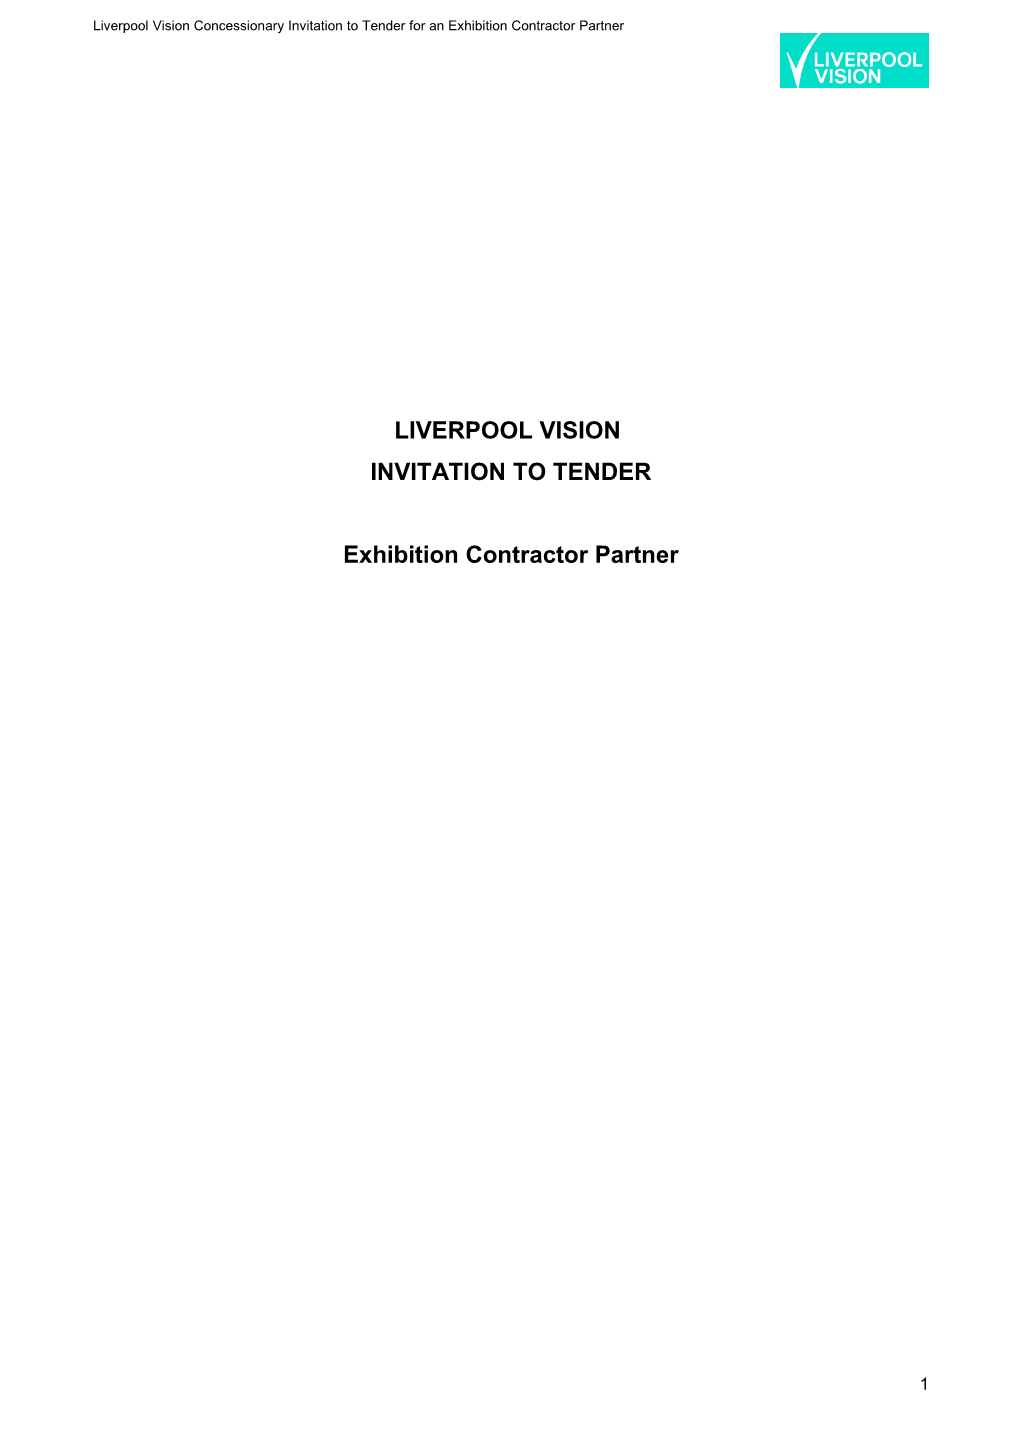 Liverpool Vision Concessionary Invitation to Tender for an Exhibition Contractor Partner